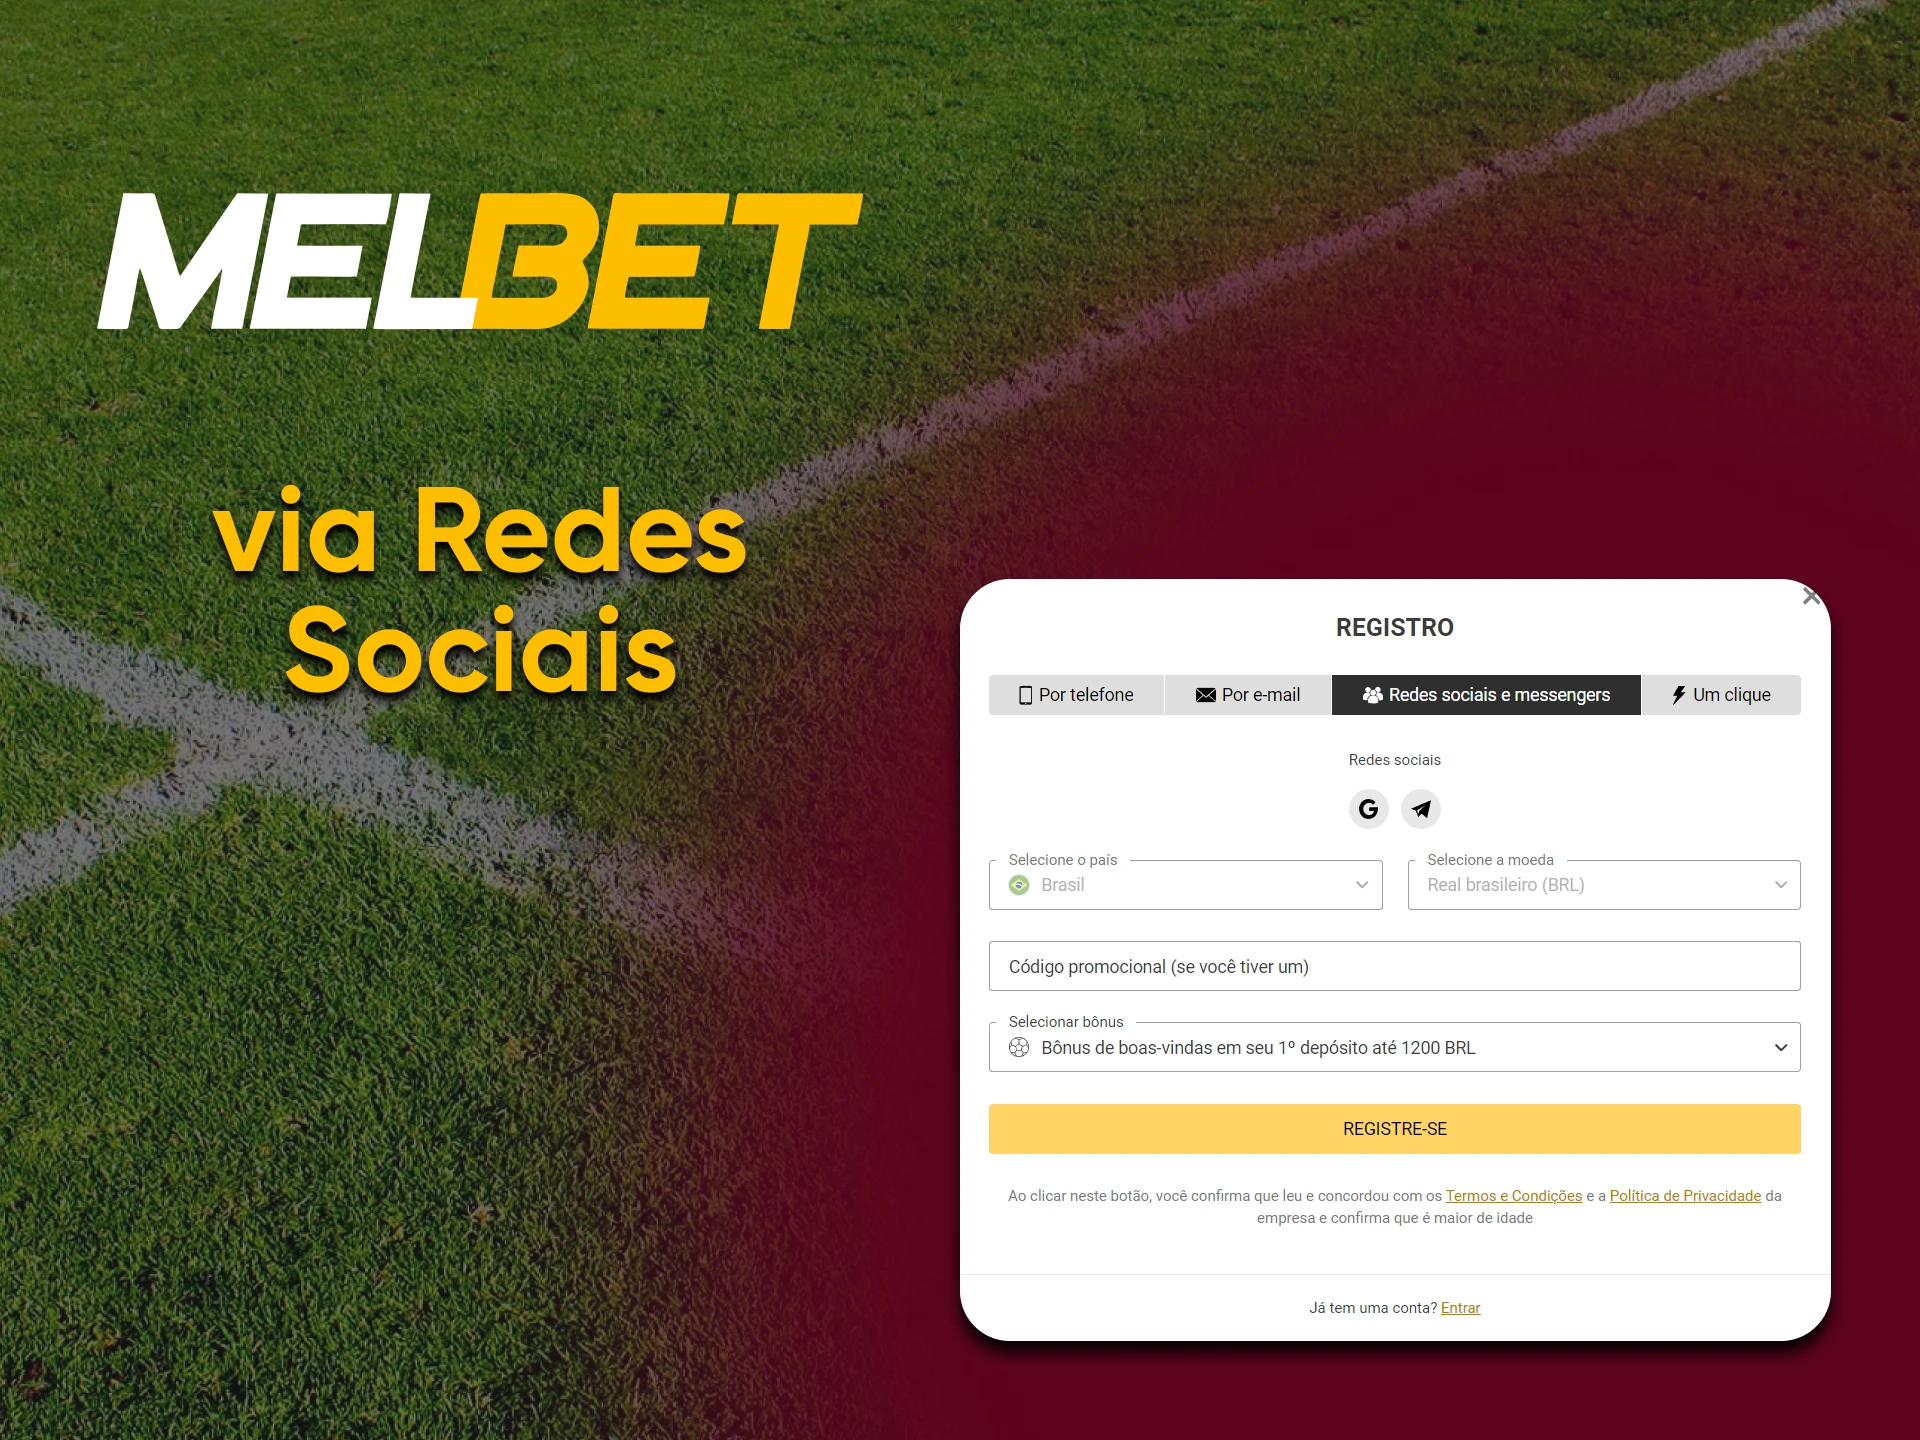 To register with Melbet you can use social networks.